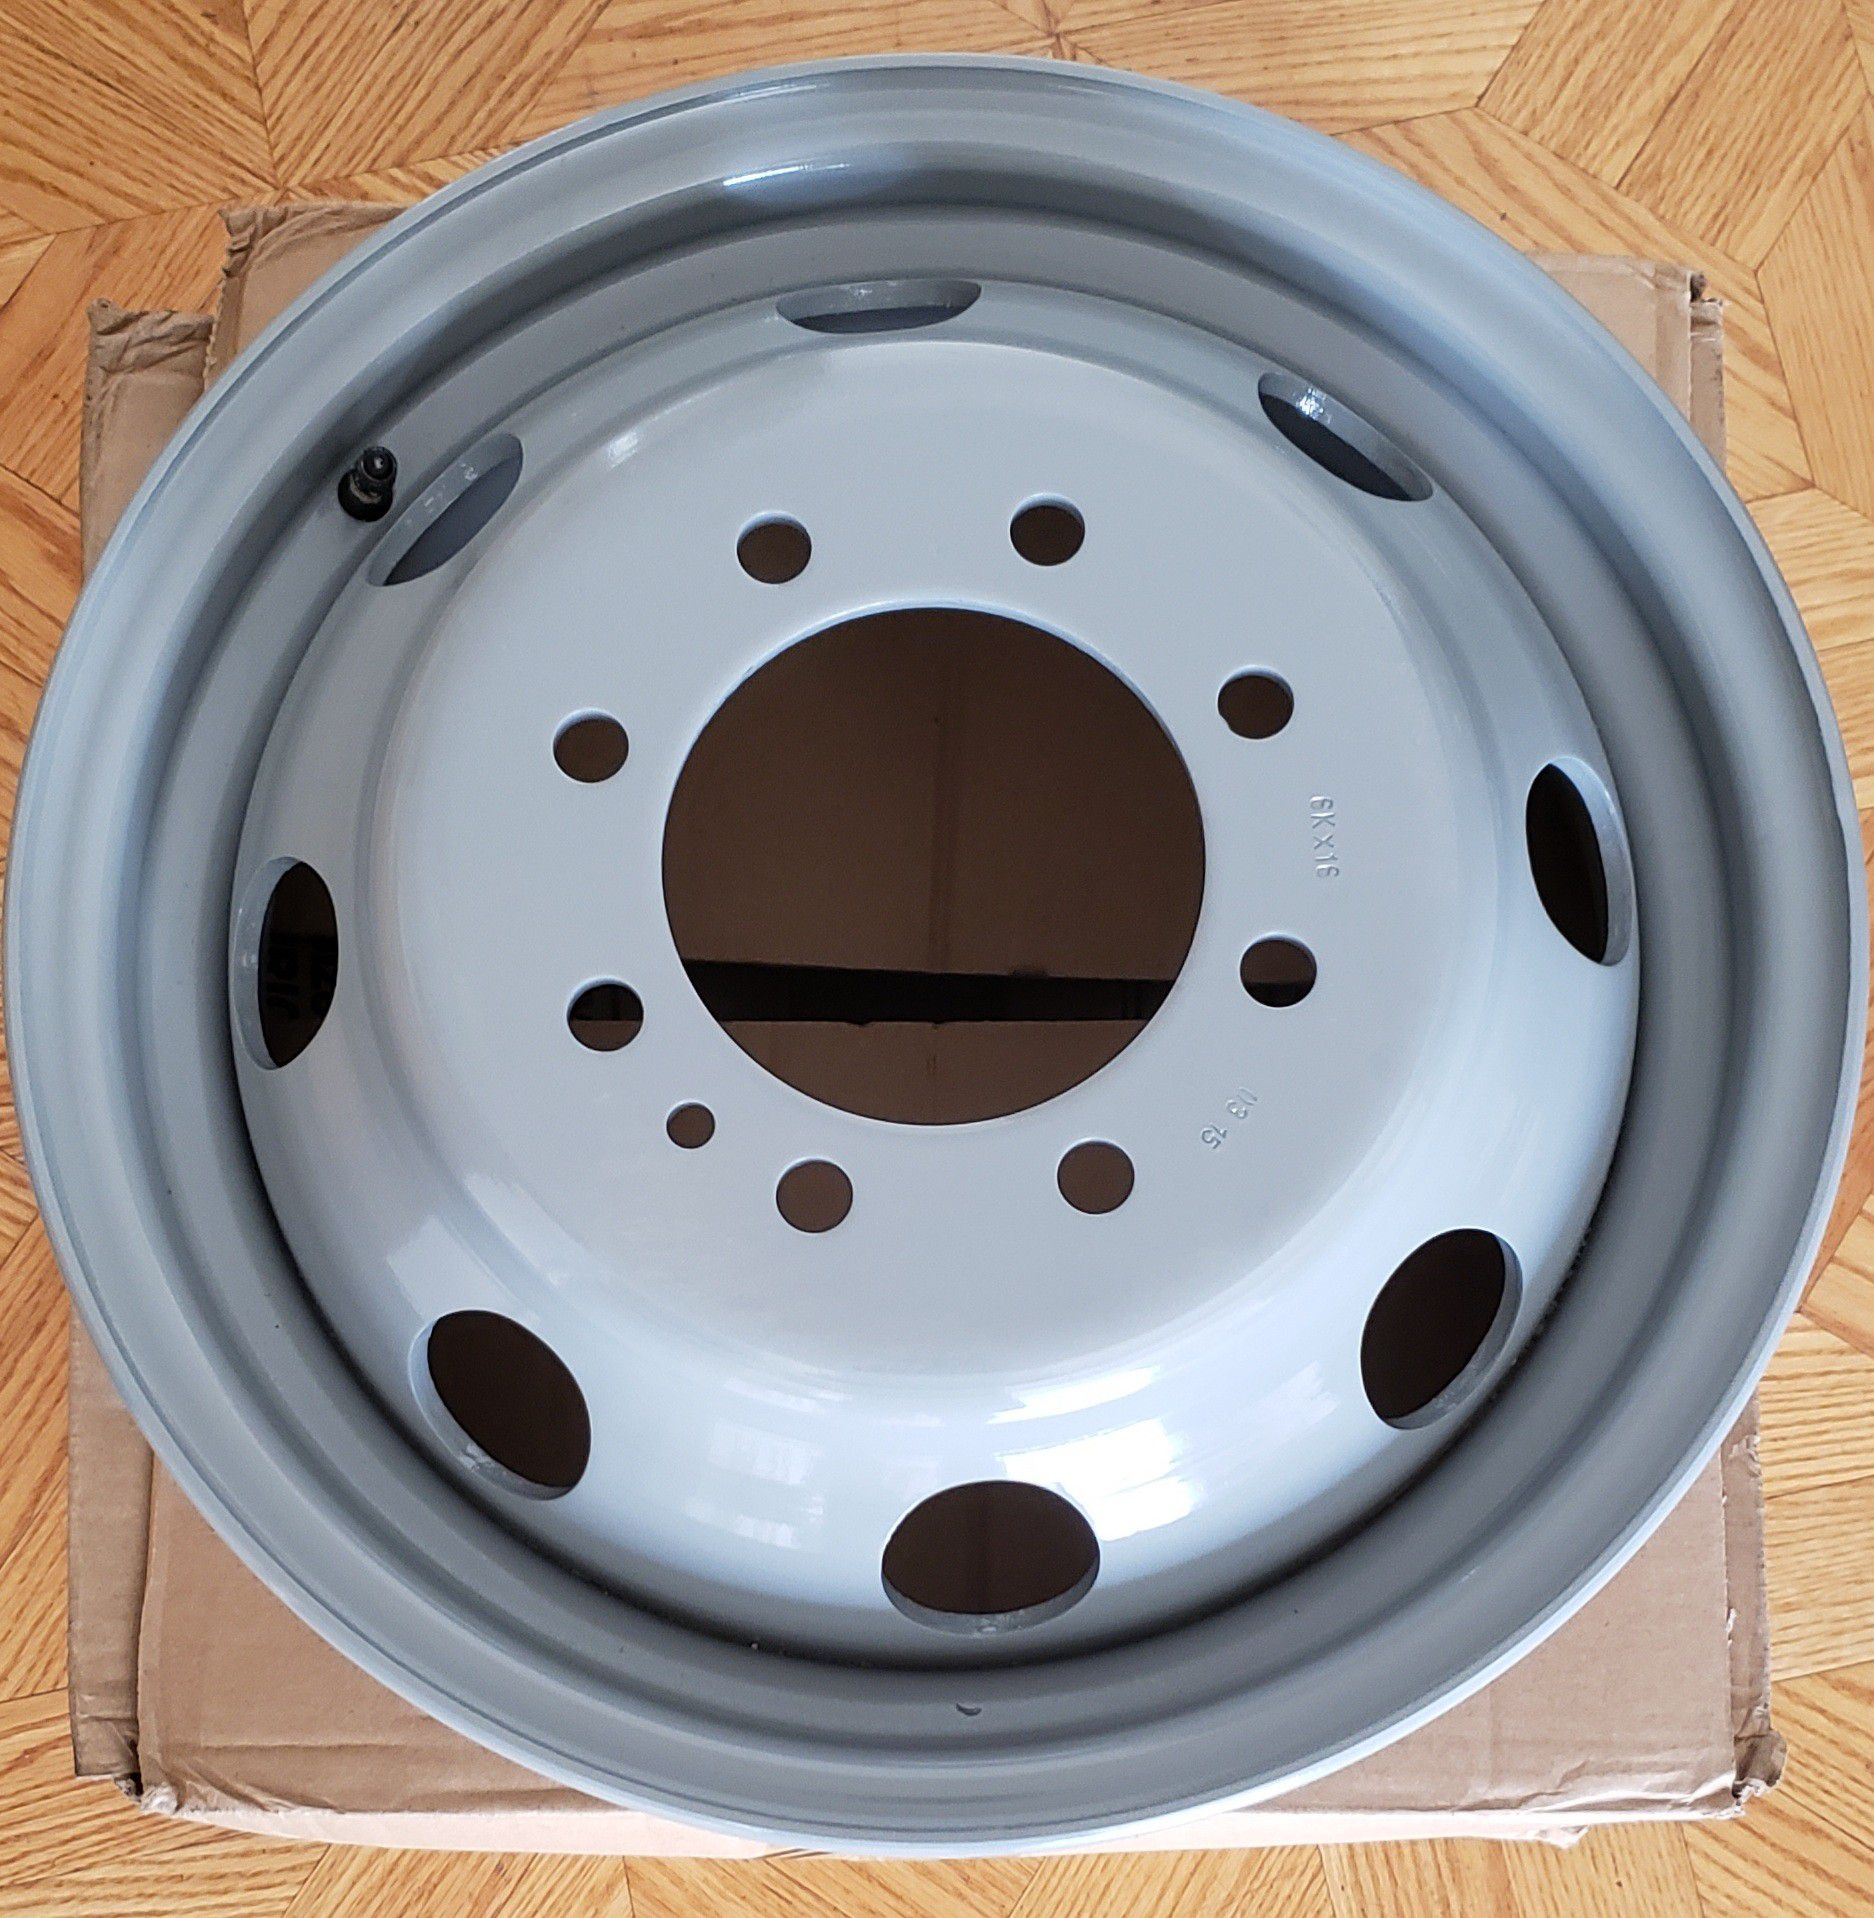 (STILL AVAILABLE AS OF 03/25/2023) Fits Ford 2003 Dually Rims 130 mm Offset, 16 x 6, 8 bolt hole